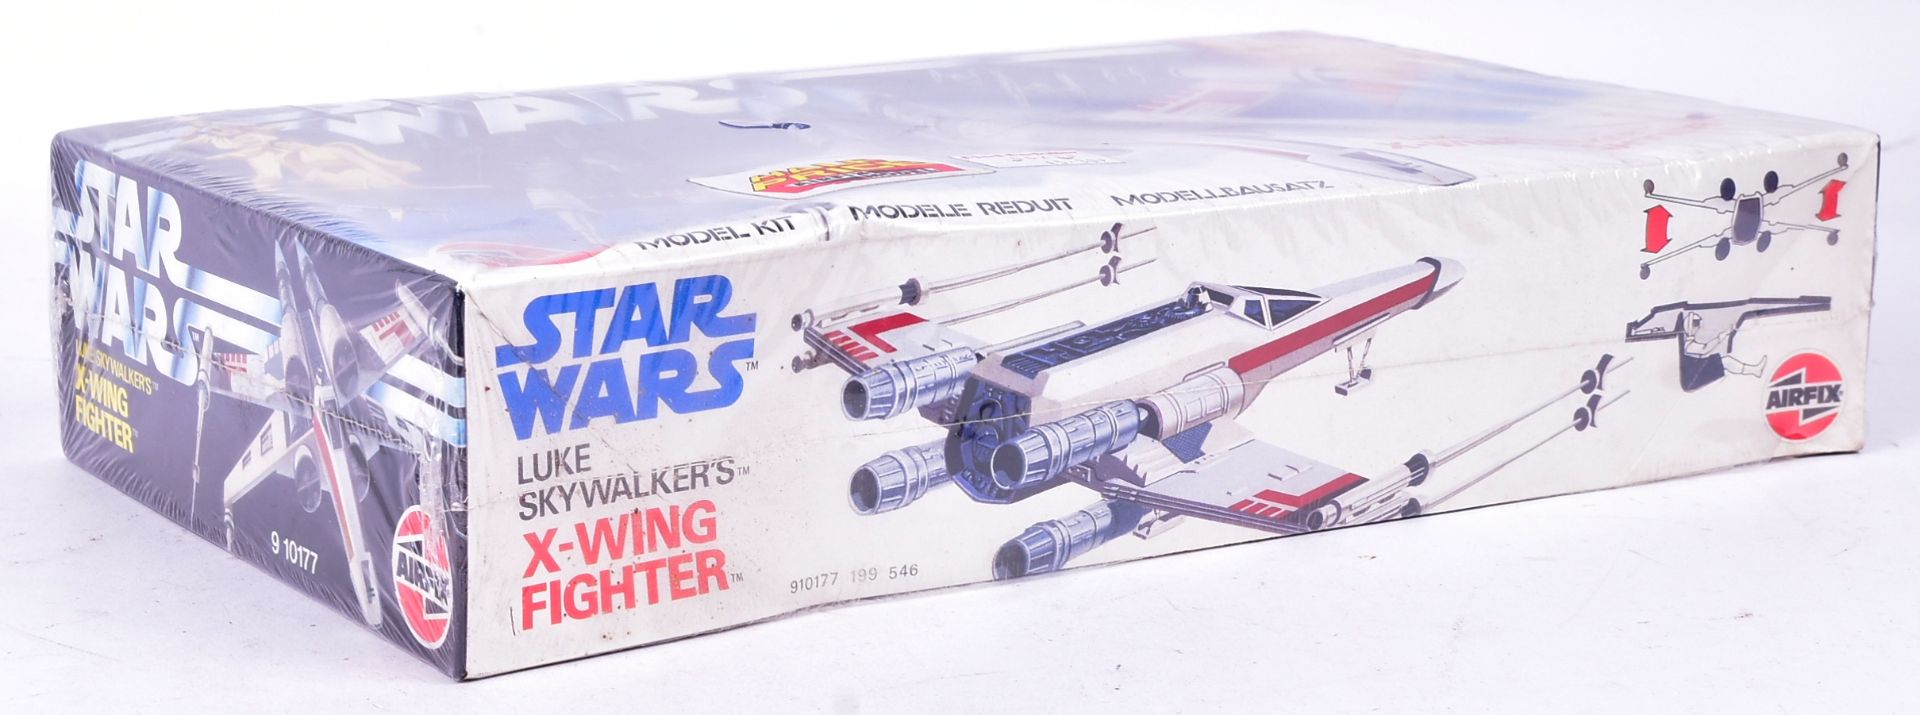 STAR WARS - VINTAGE AIRFIX FACTORY SEALED X-WING FIGHTER MODEL KIT - Image 3 of 3